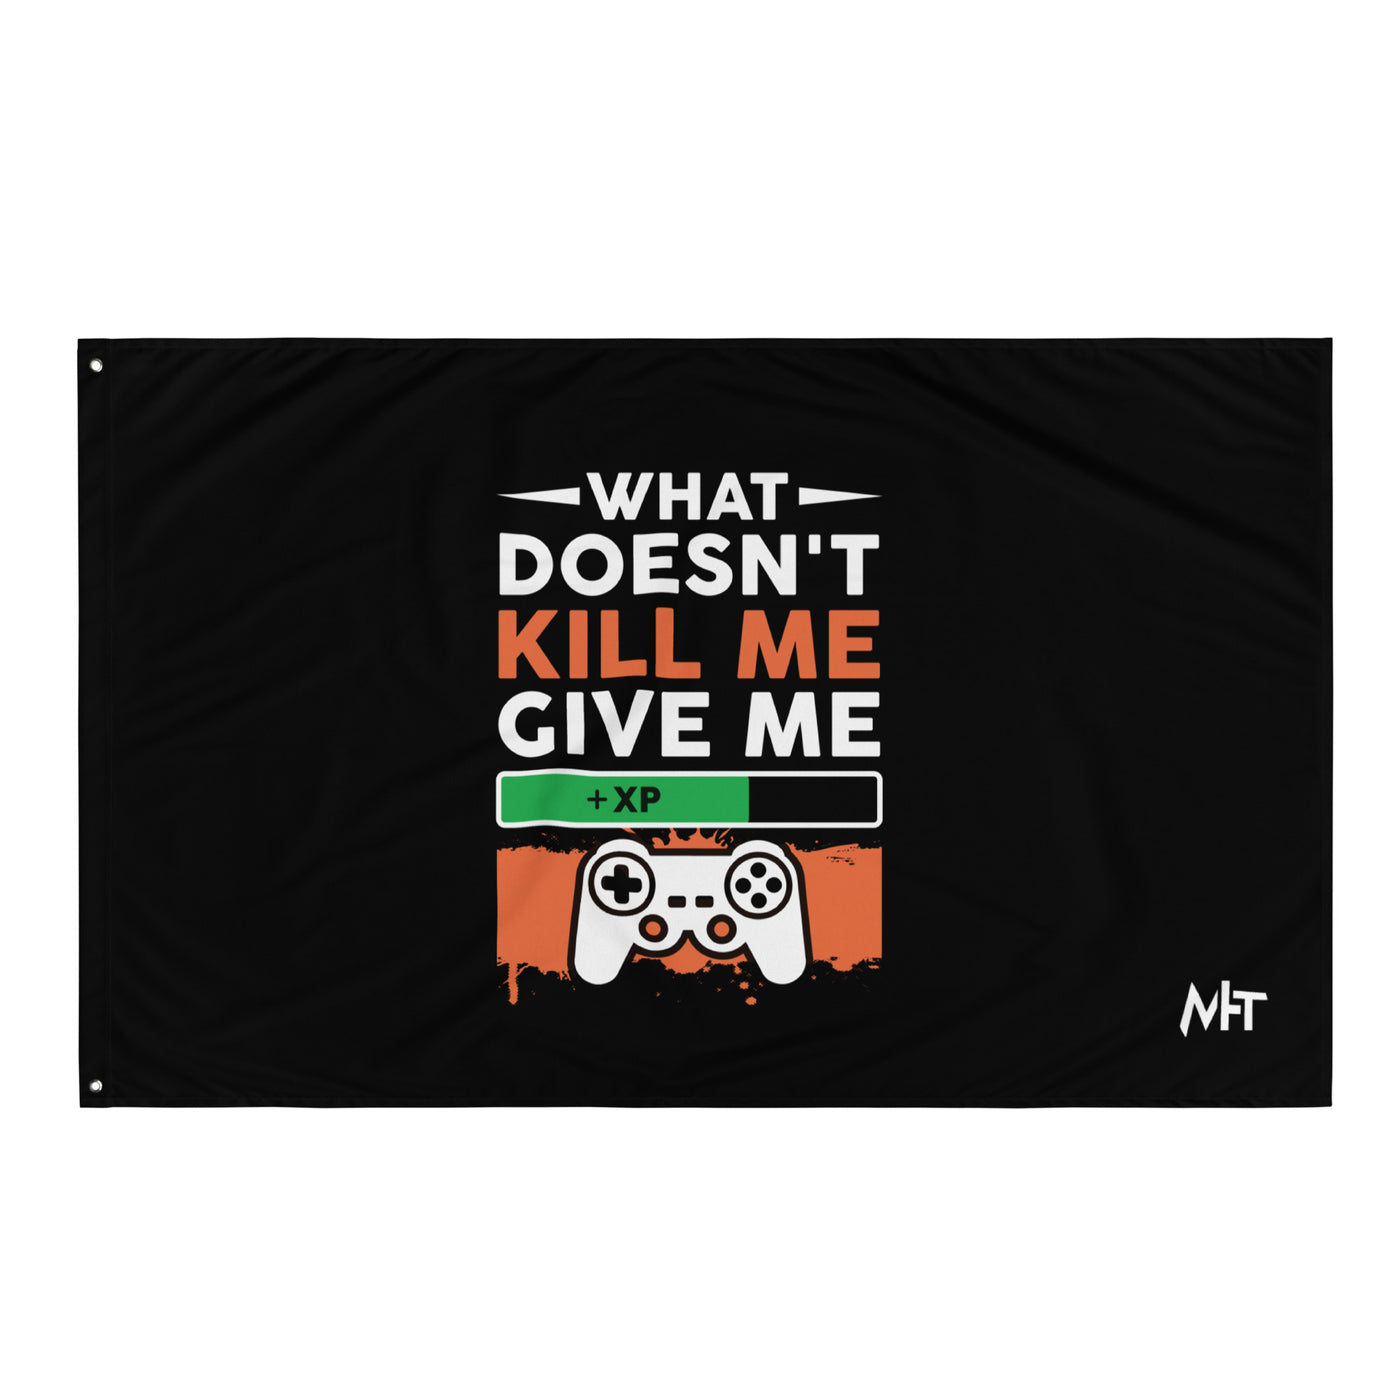 What doesn't Kill me, give me +xp - Flag